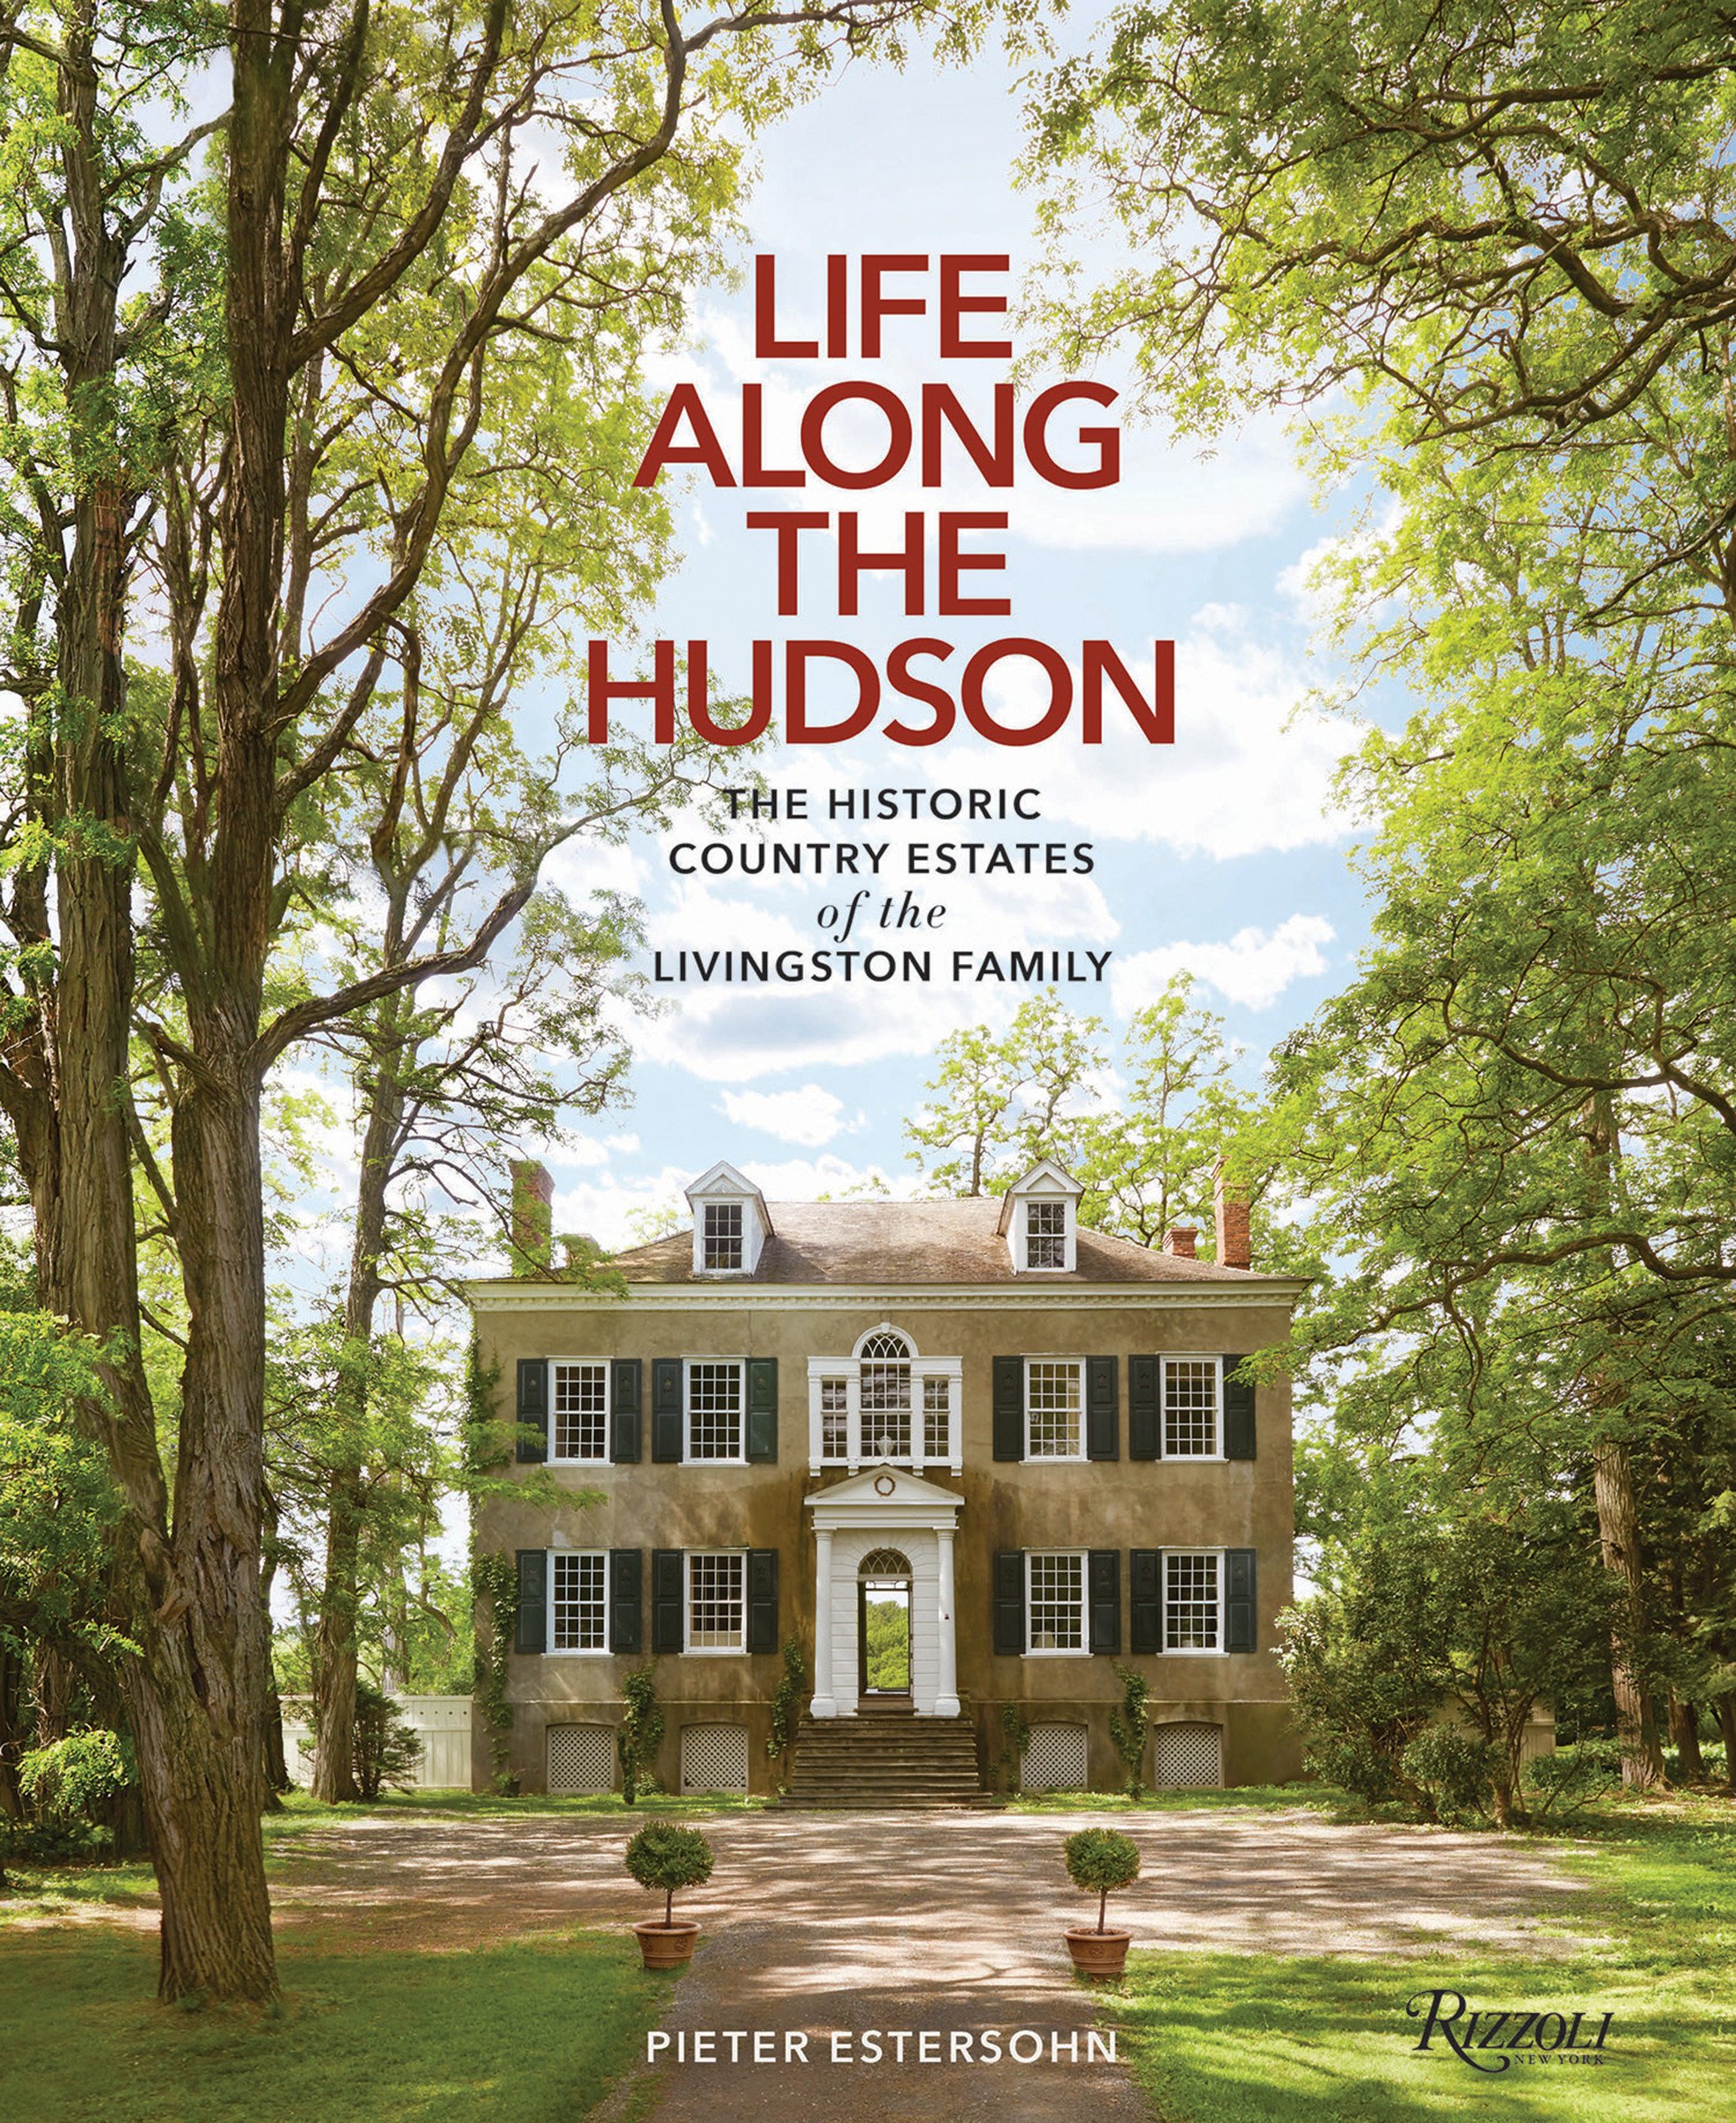 A Life Along the Hudson: The Historic Country Estates of the Livingston Family